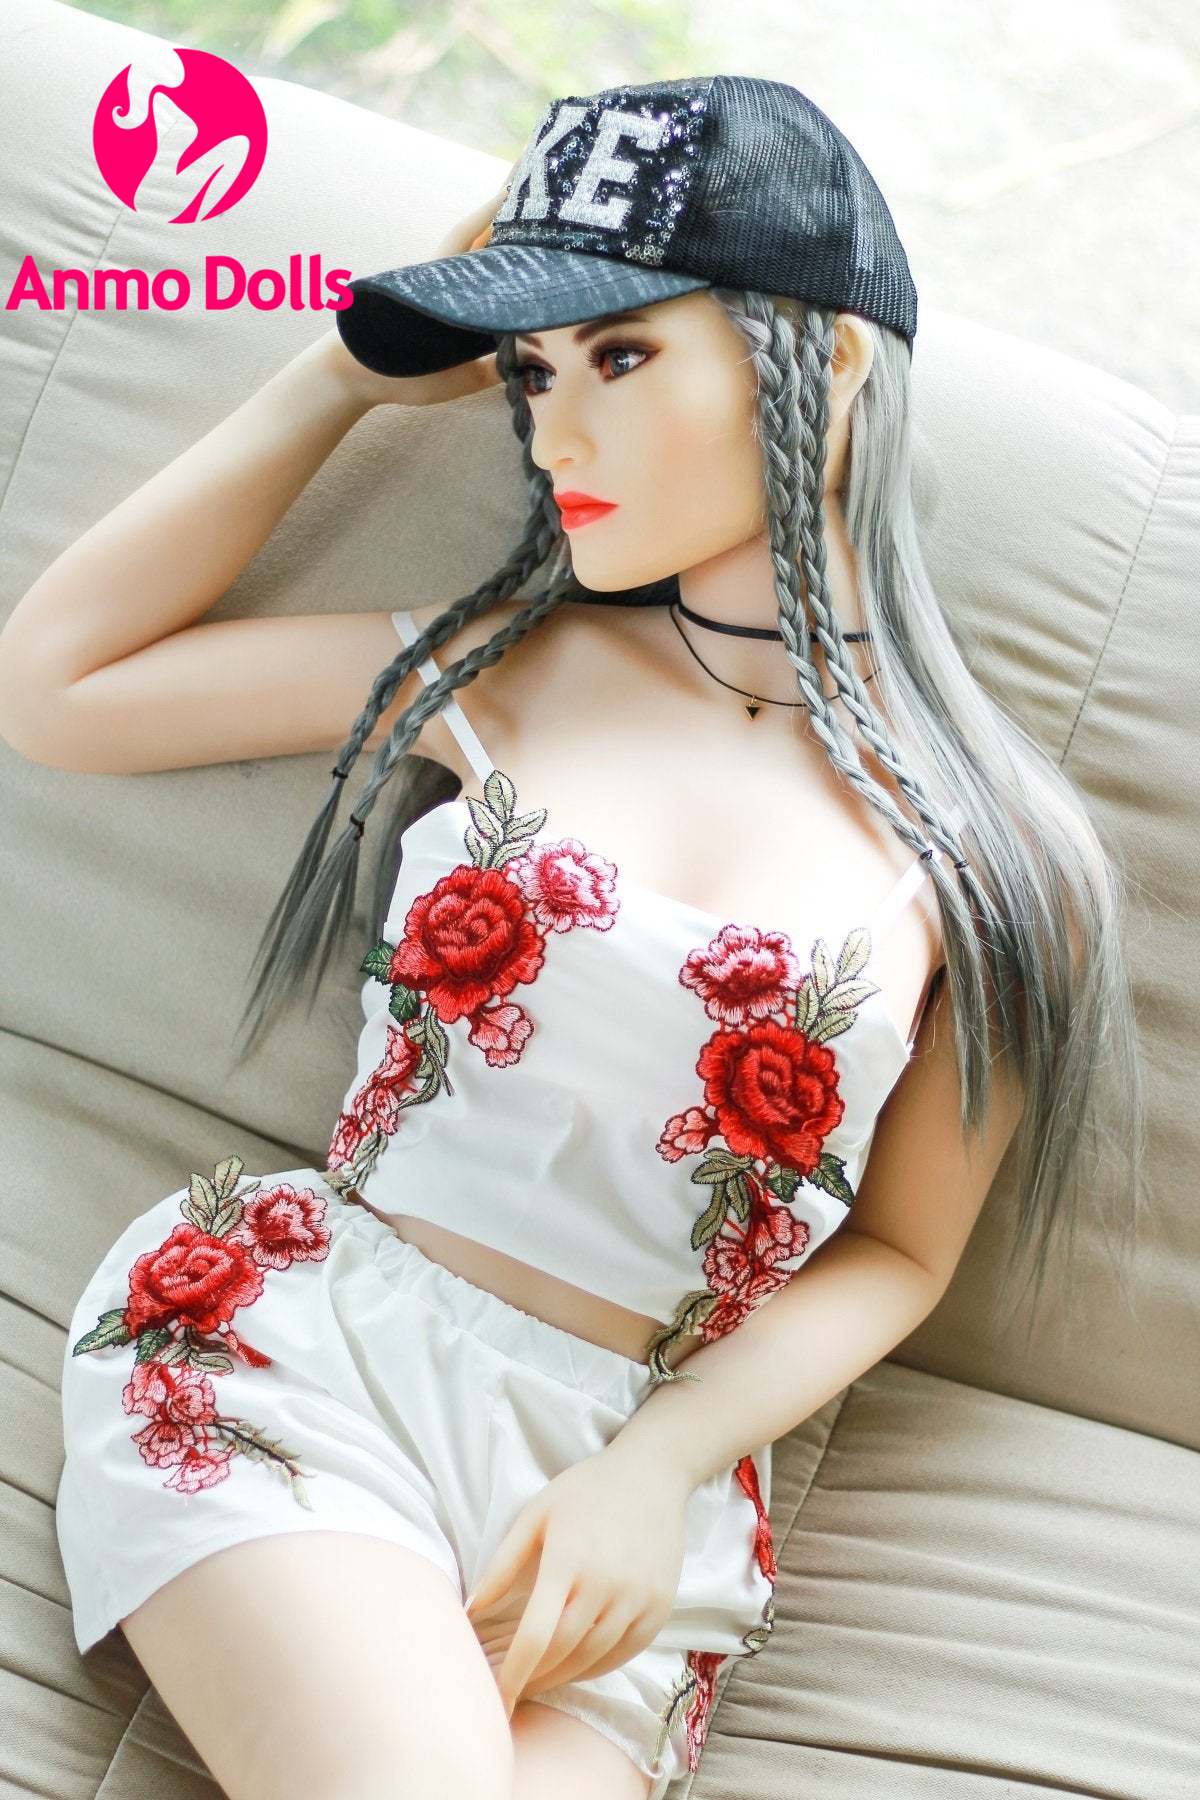 Braelynn - Very Hot Sex Doll With movable Joints -TPE Sex Doll by Anmodolls